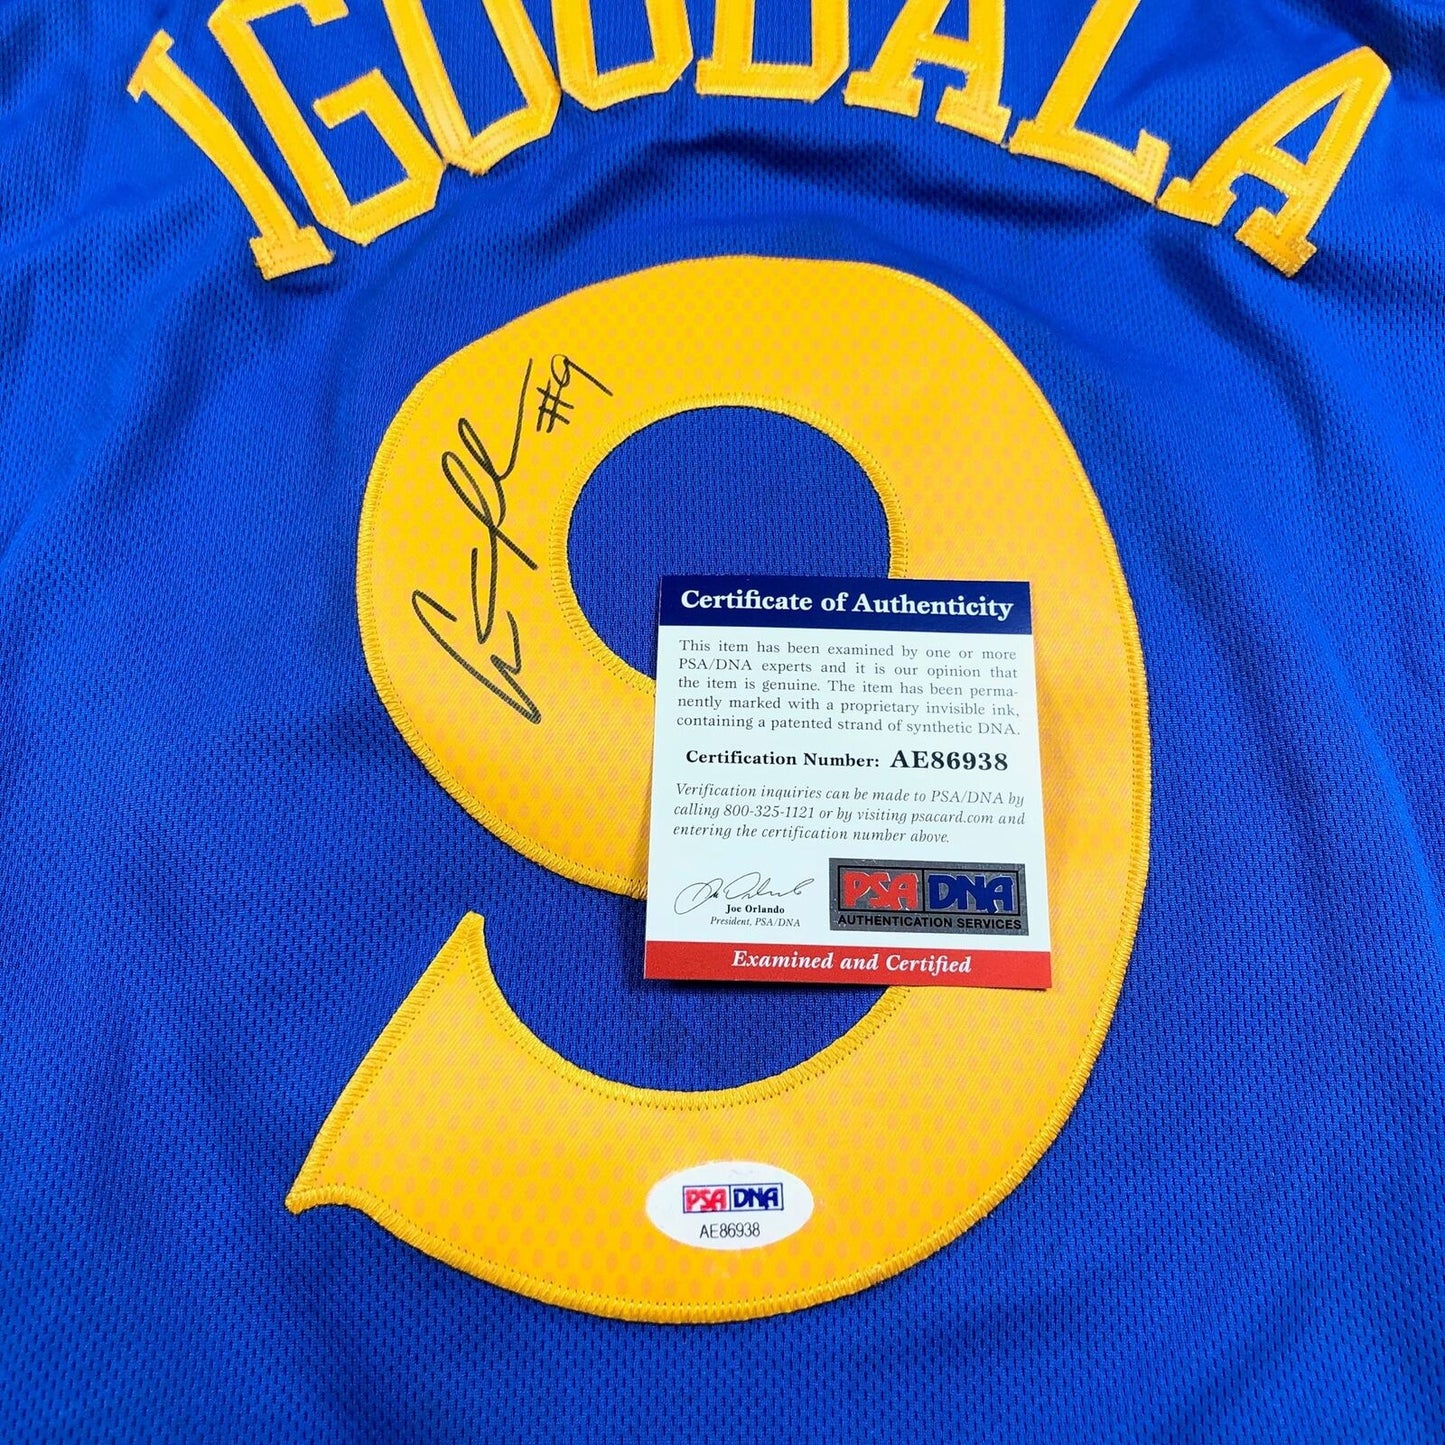 Andre Iguodala signed jersey PSA/DNA Golden State Warriors Autographed